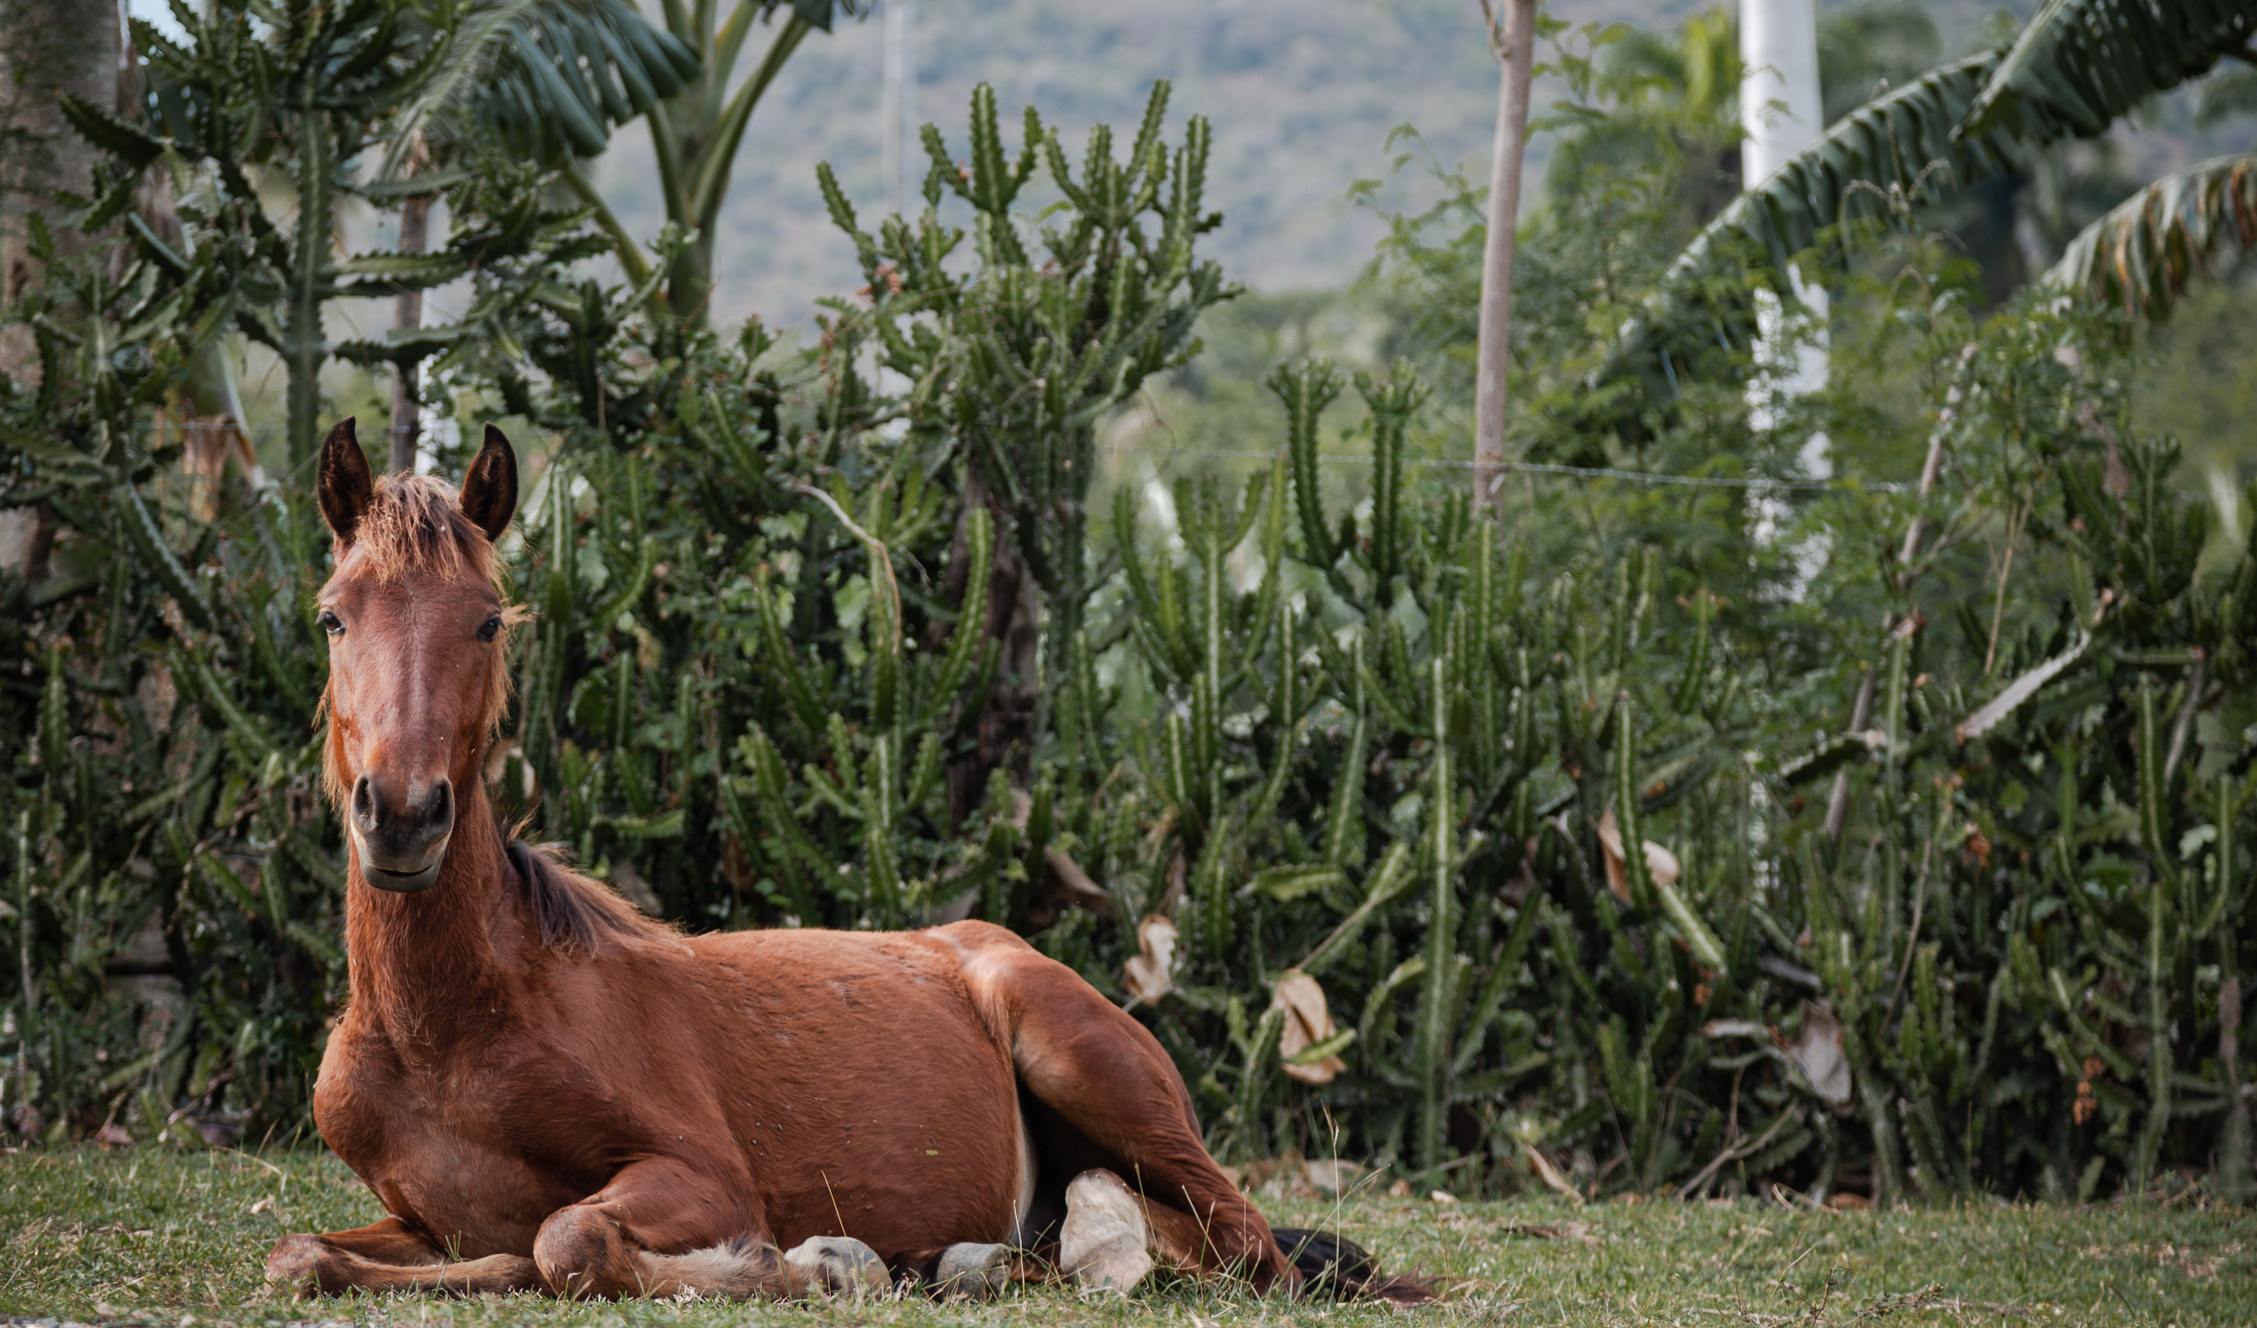 Horse laying down in a field